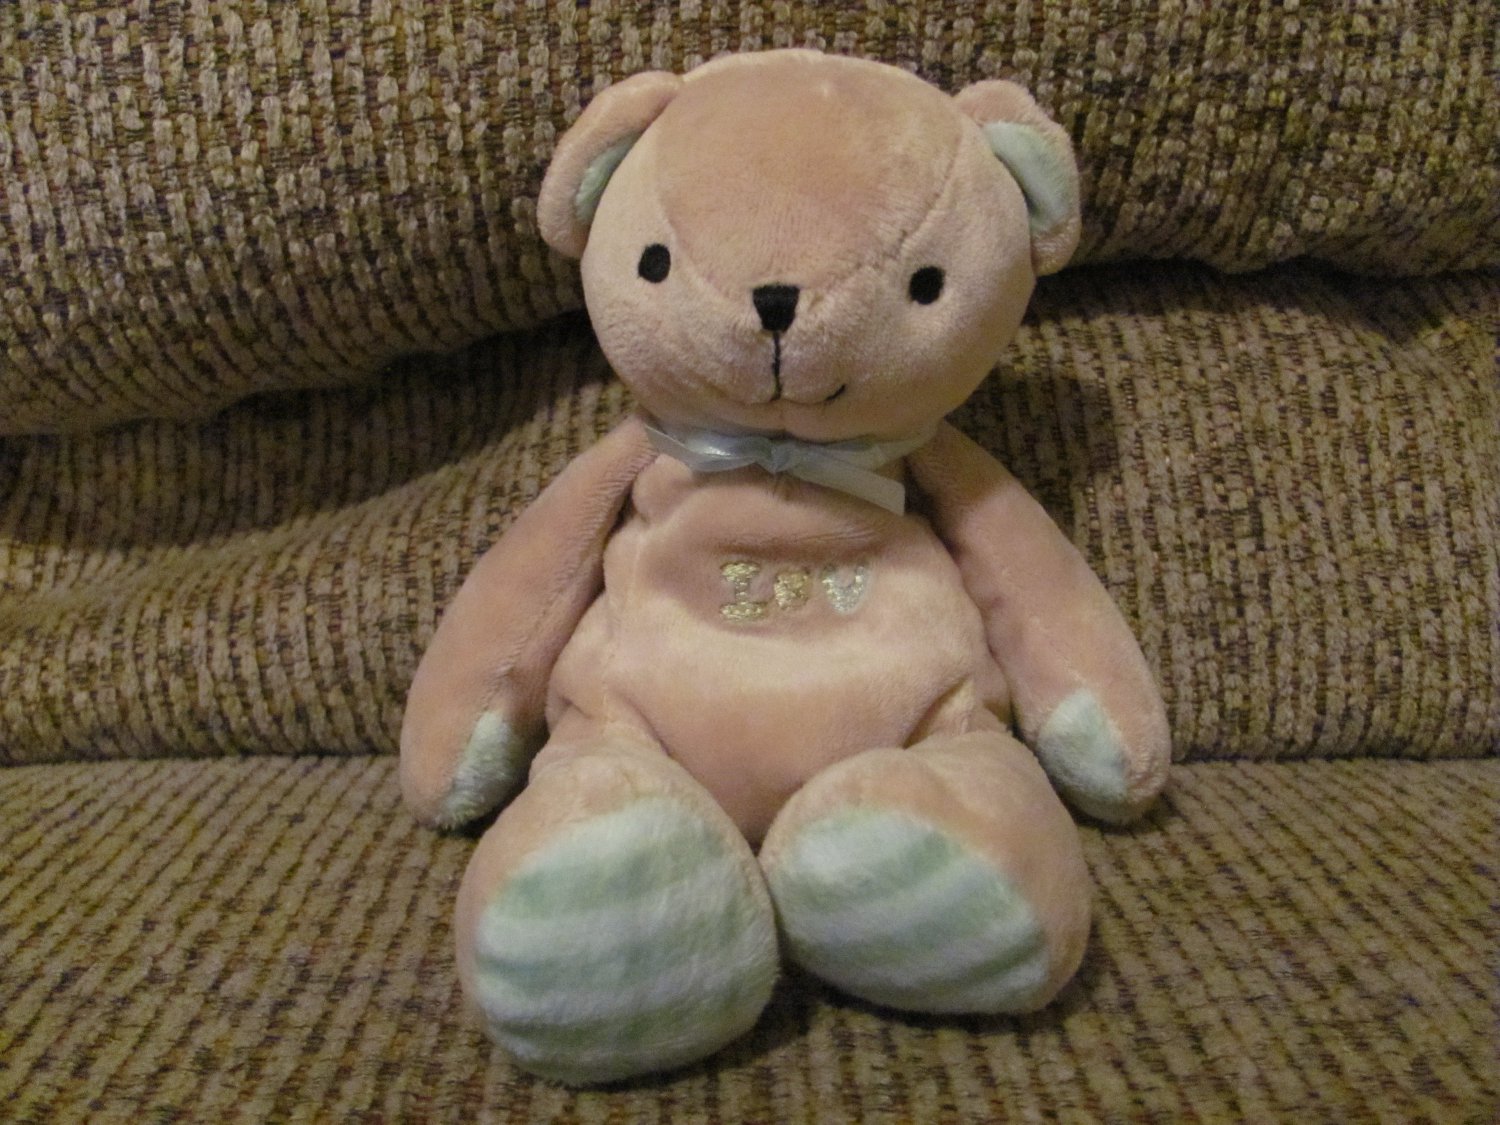 Carters Just One Year Tan I Love You Stitched Teddy Bear Lovey Plush